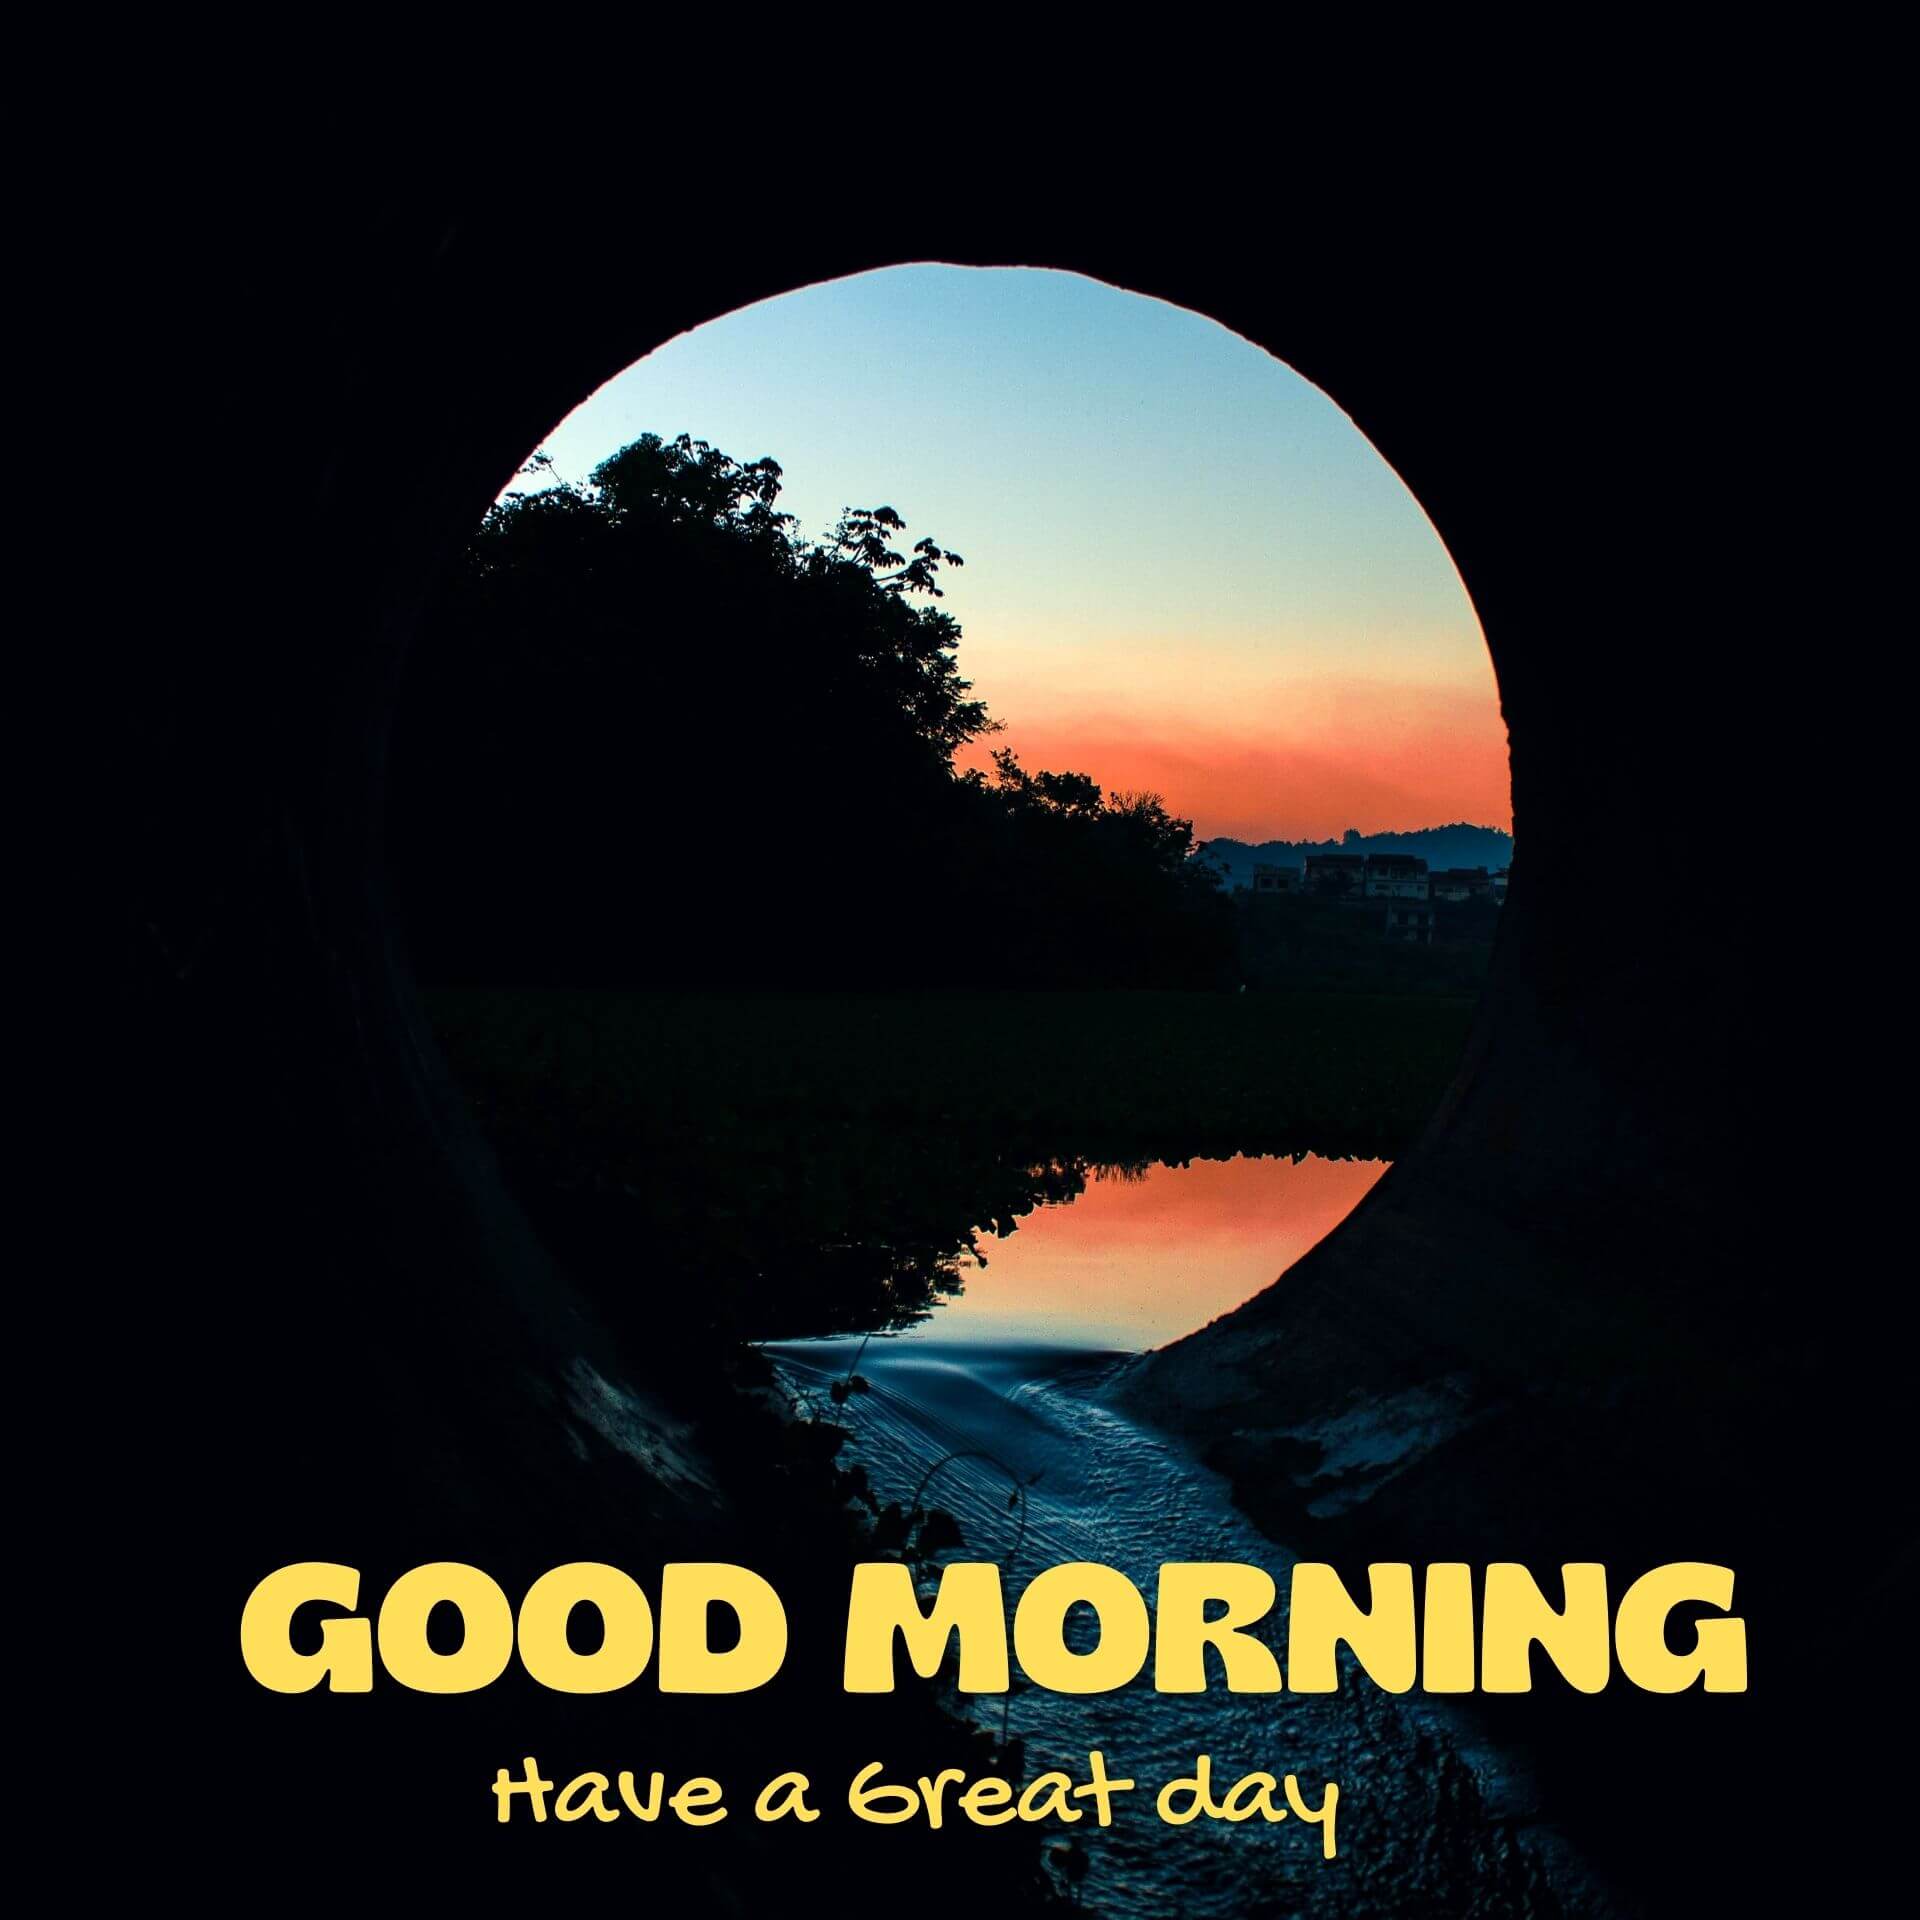 Good morning have a nice day Wallpaper HD New Download